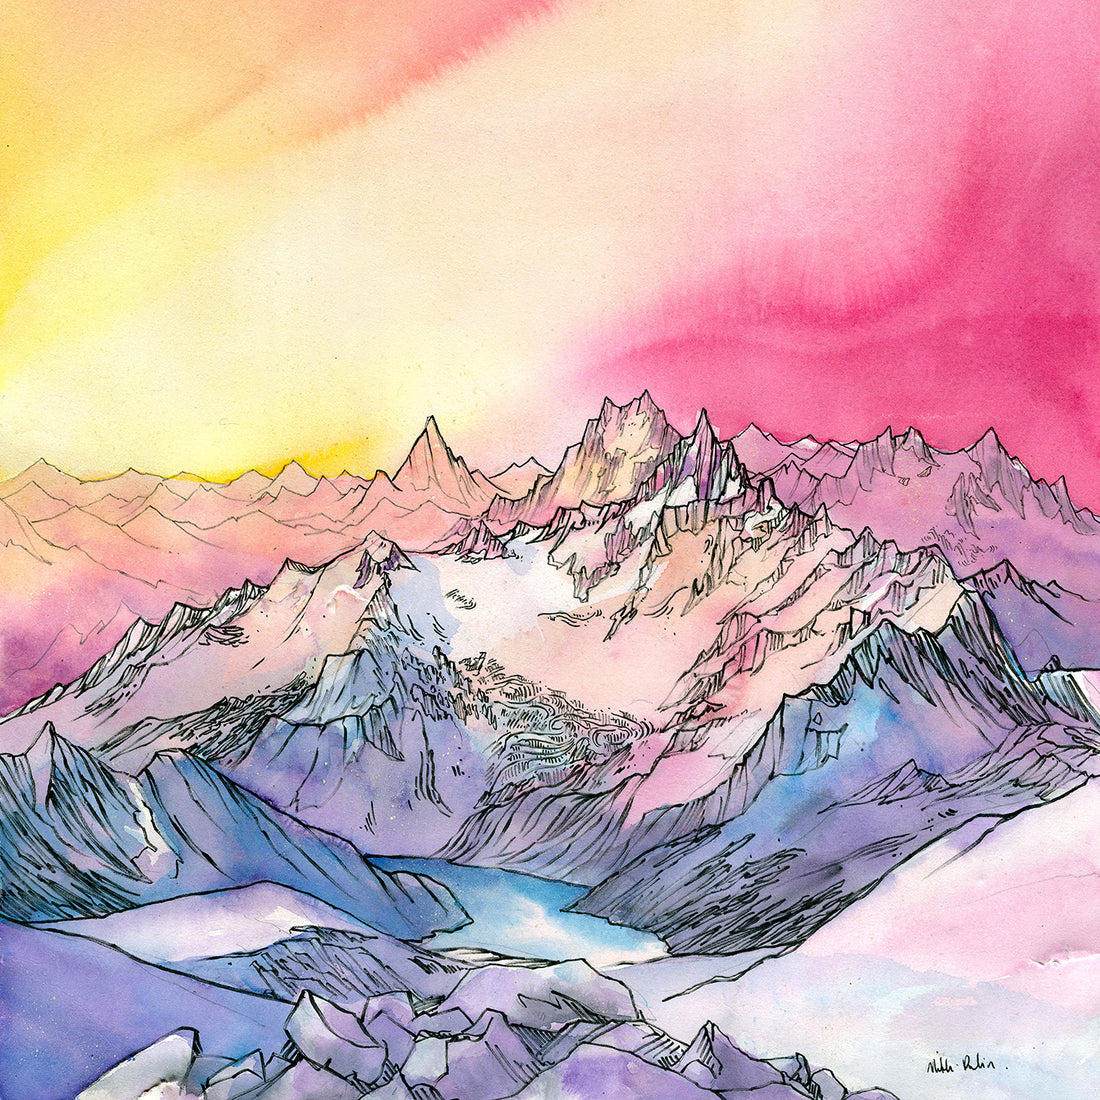 Painting the PNW: Alpenglow Workshop, October 14